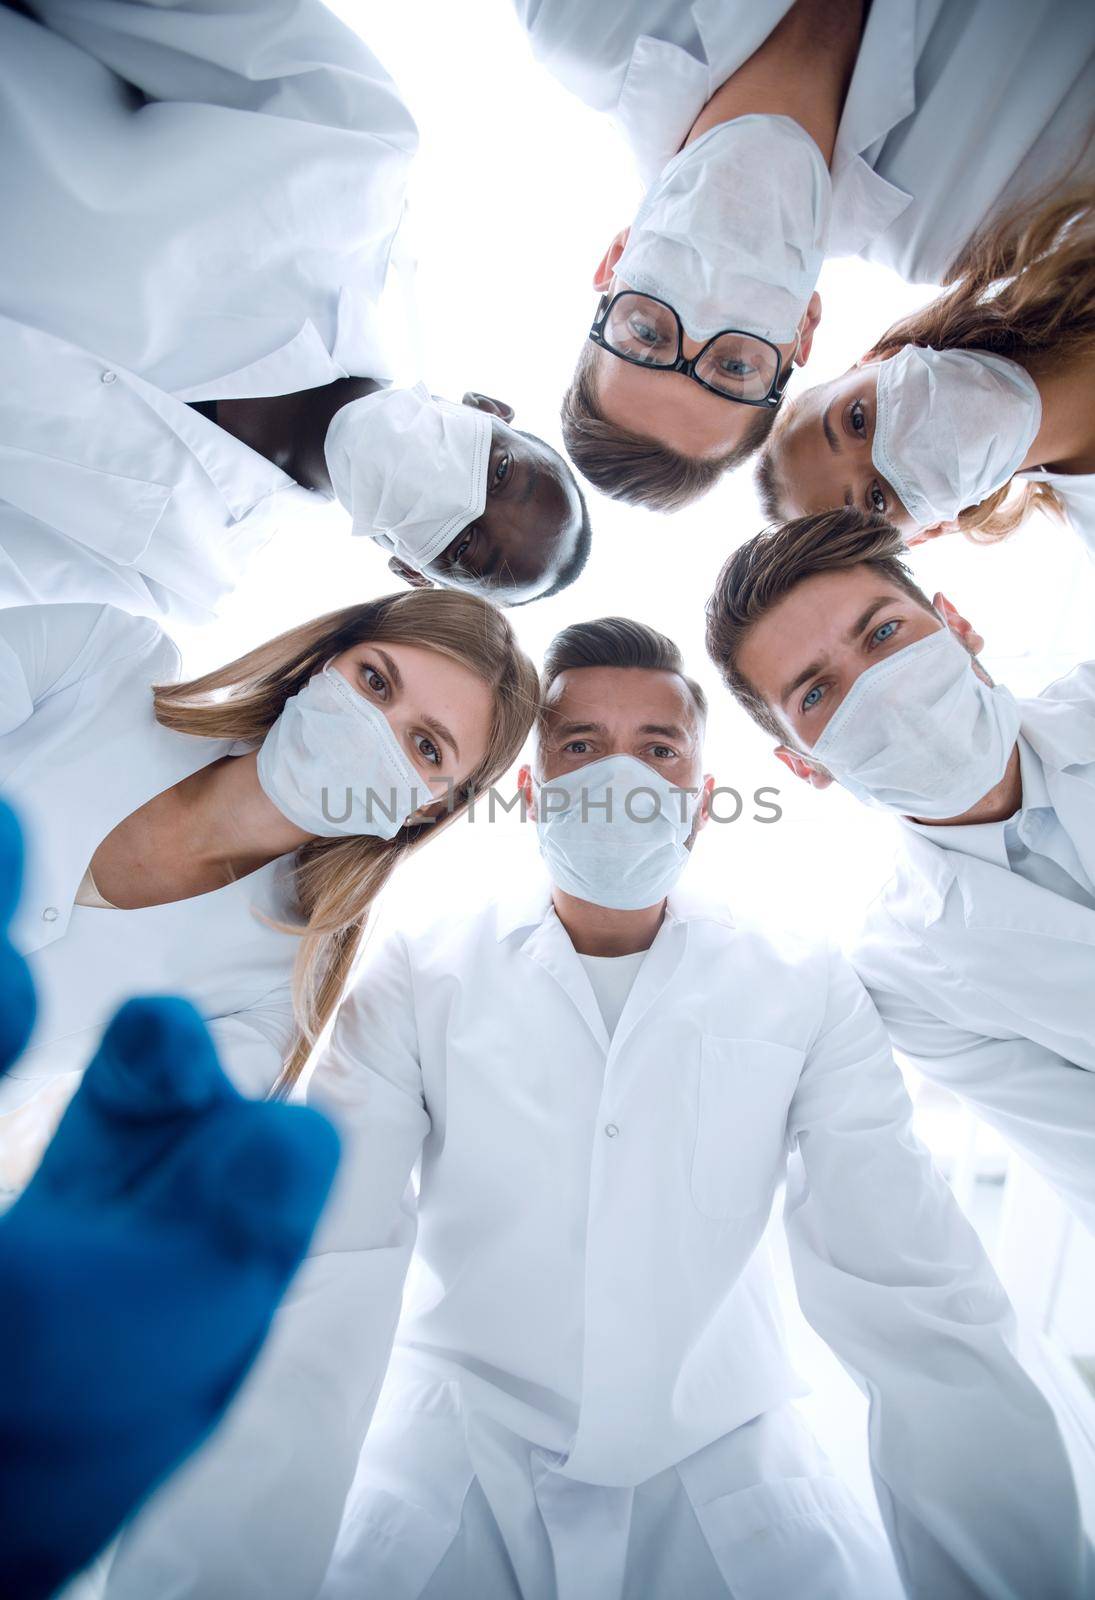 Surgeons in operating theatre looking down at patient, personal perspective